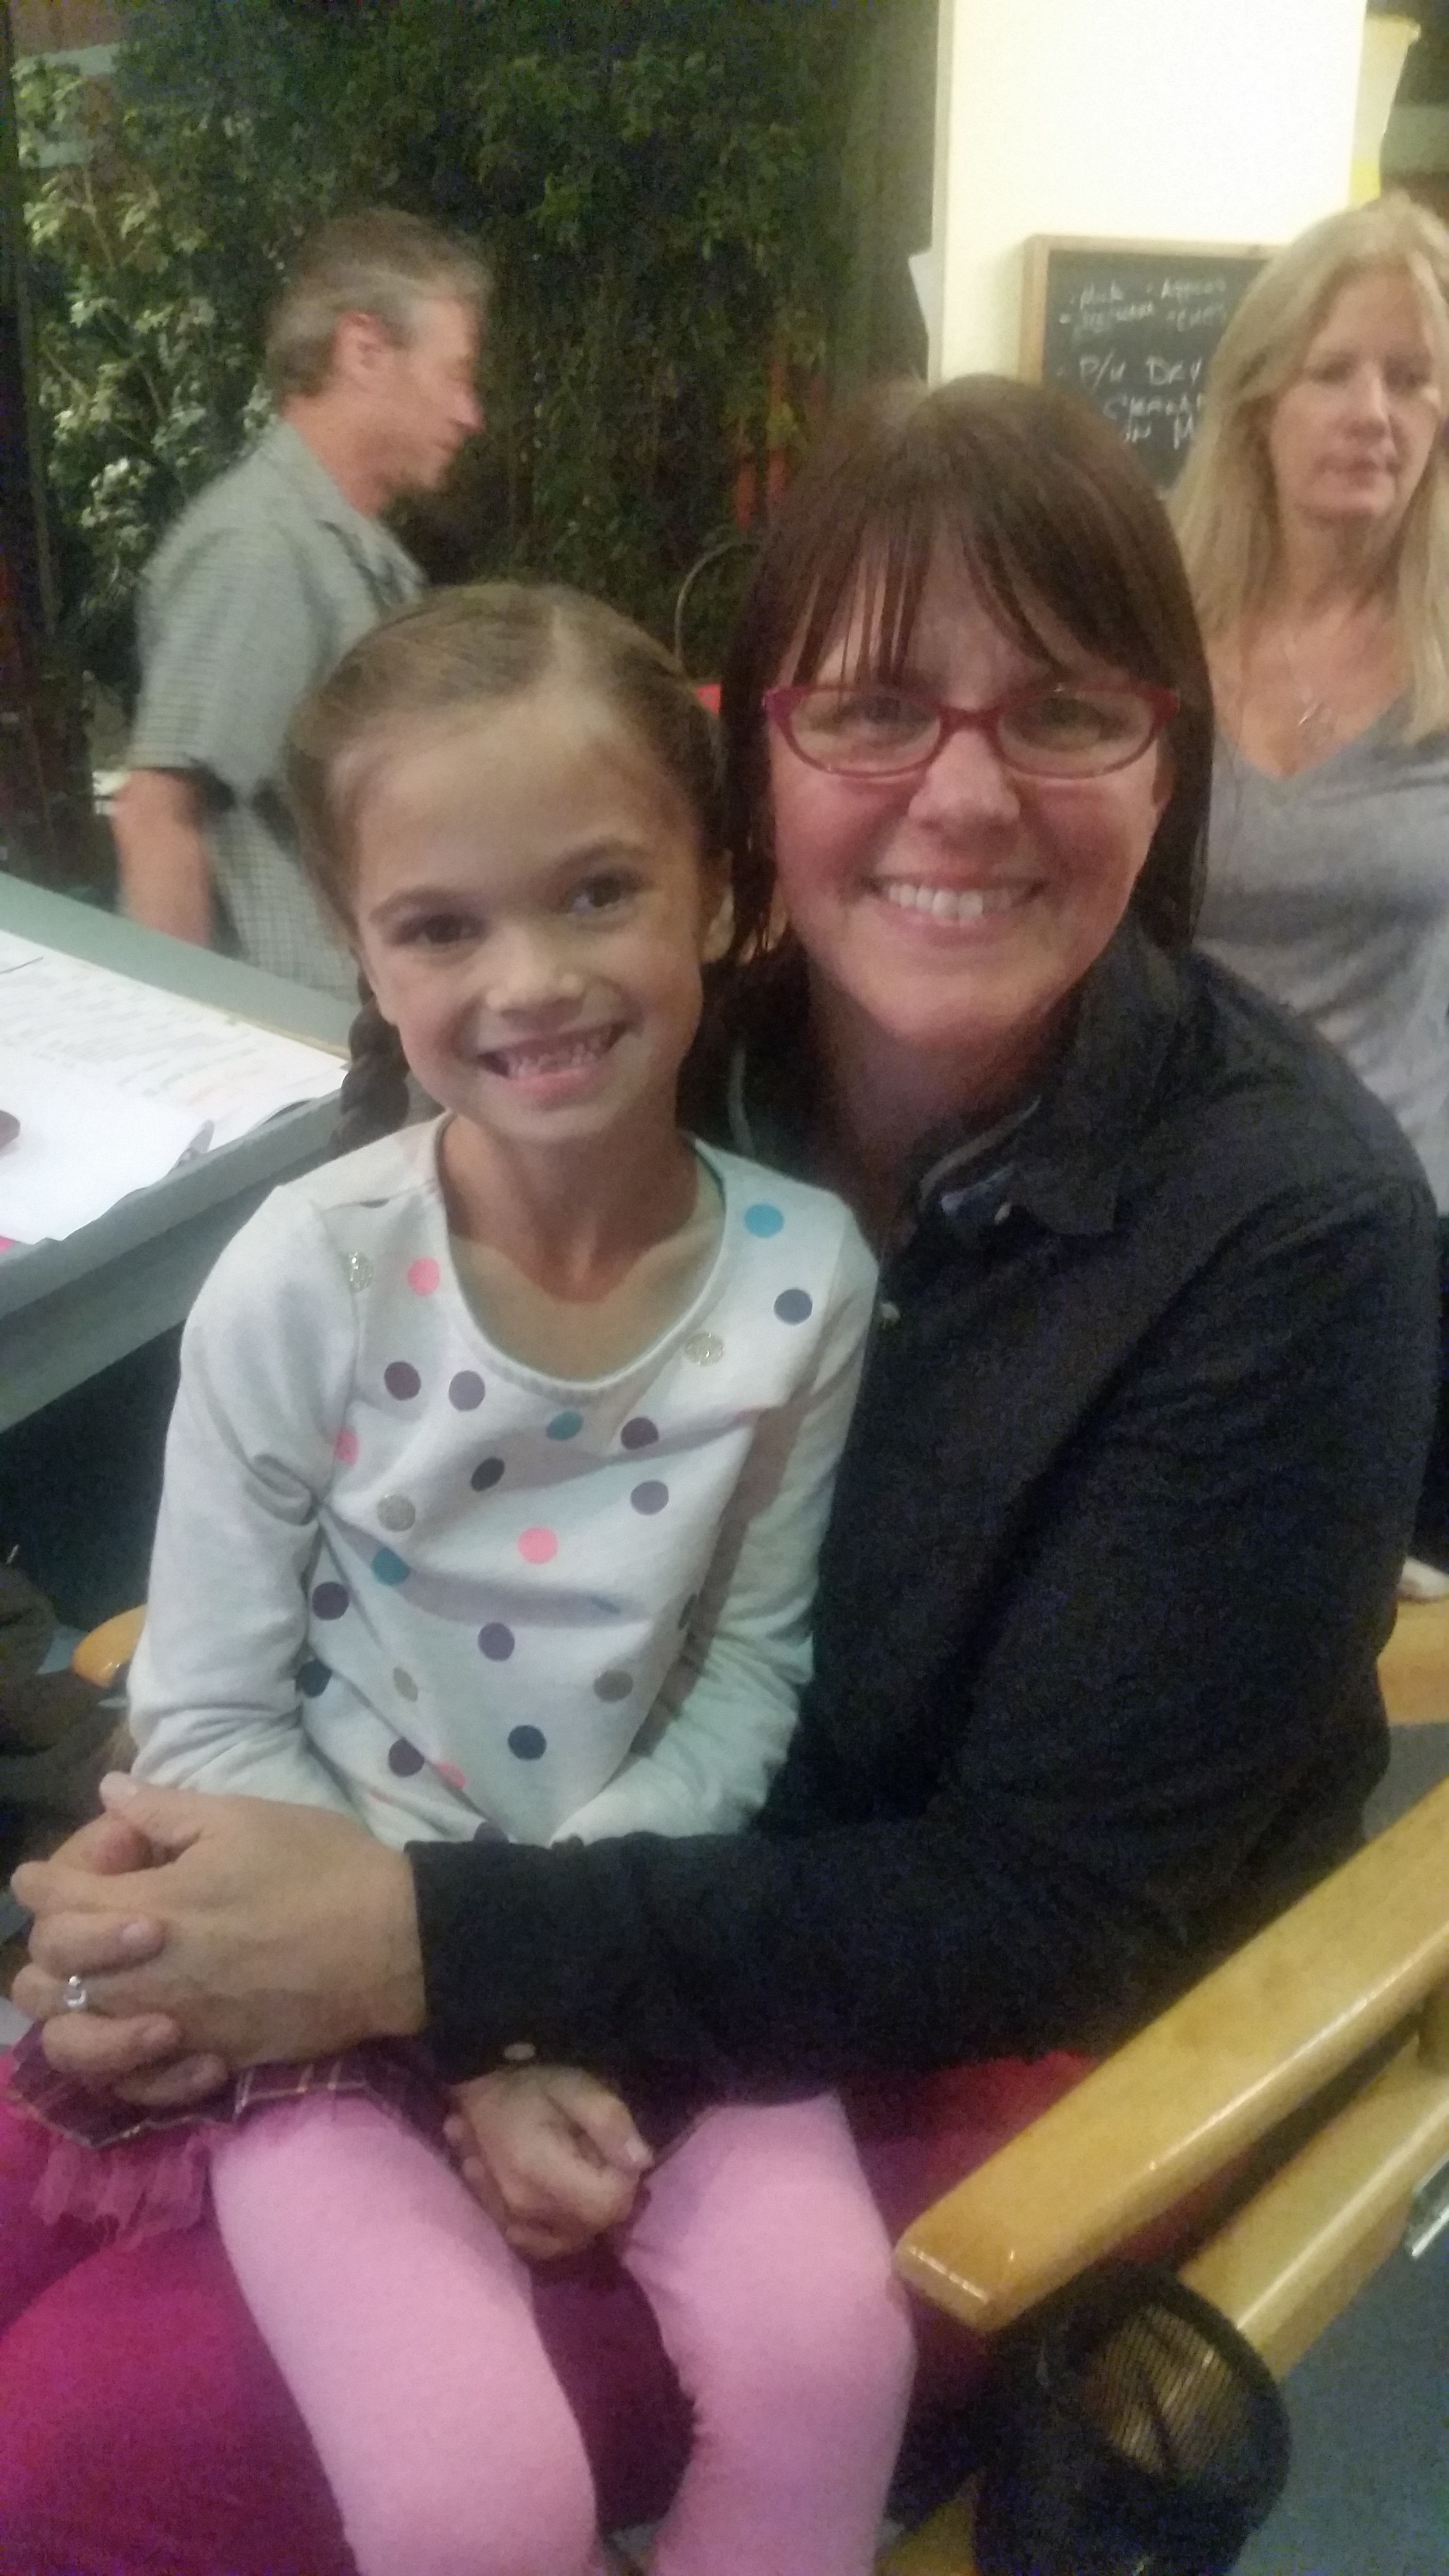 Paisley with director Shannon Flynn on set of Nickelodeon's Nicky, Ricky, Dicky and Dawn.